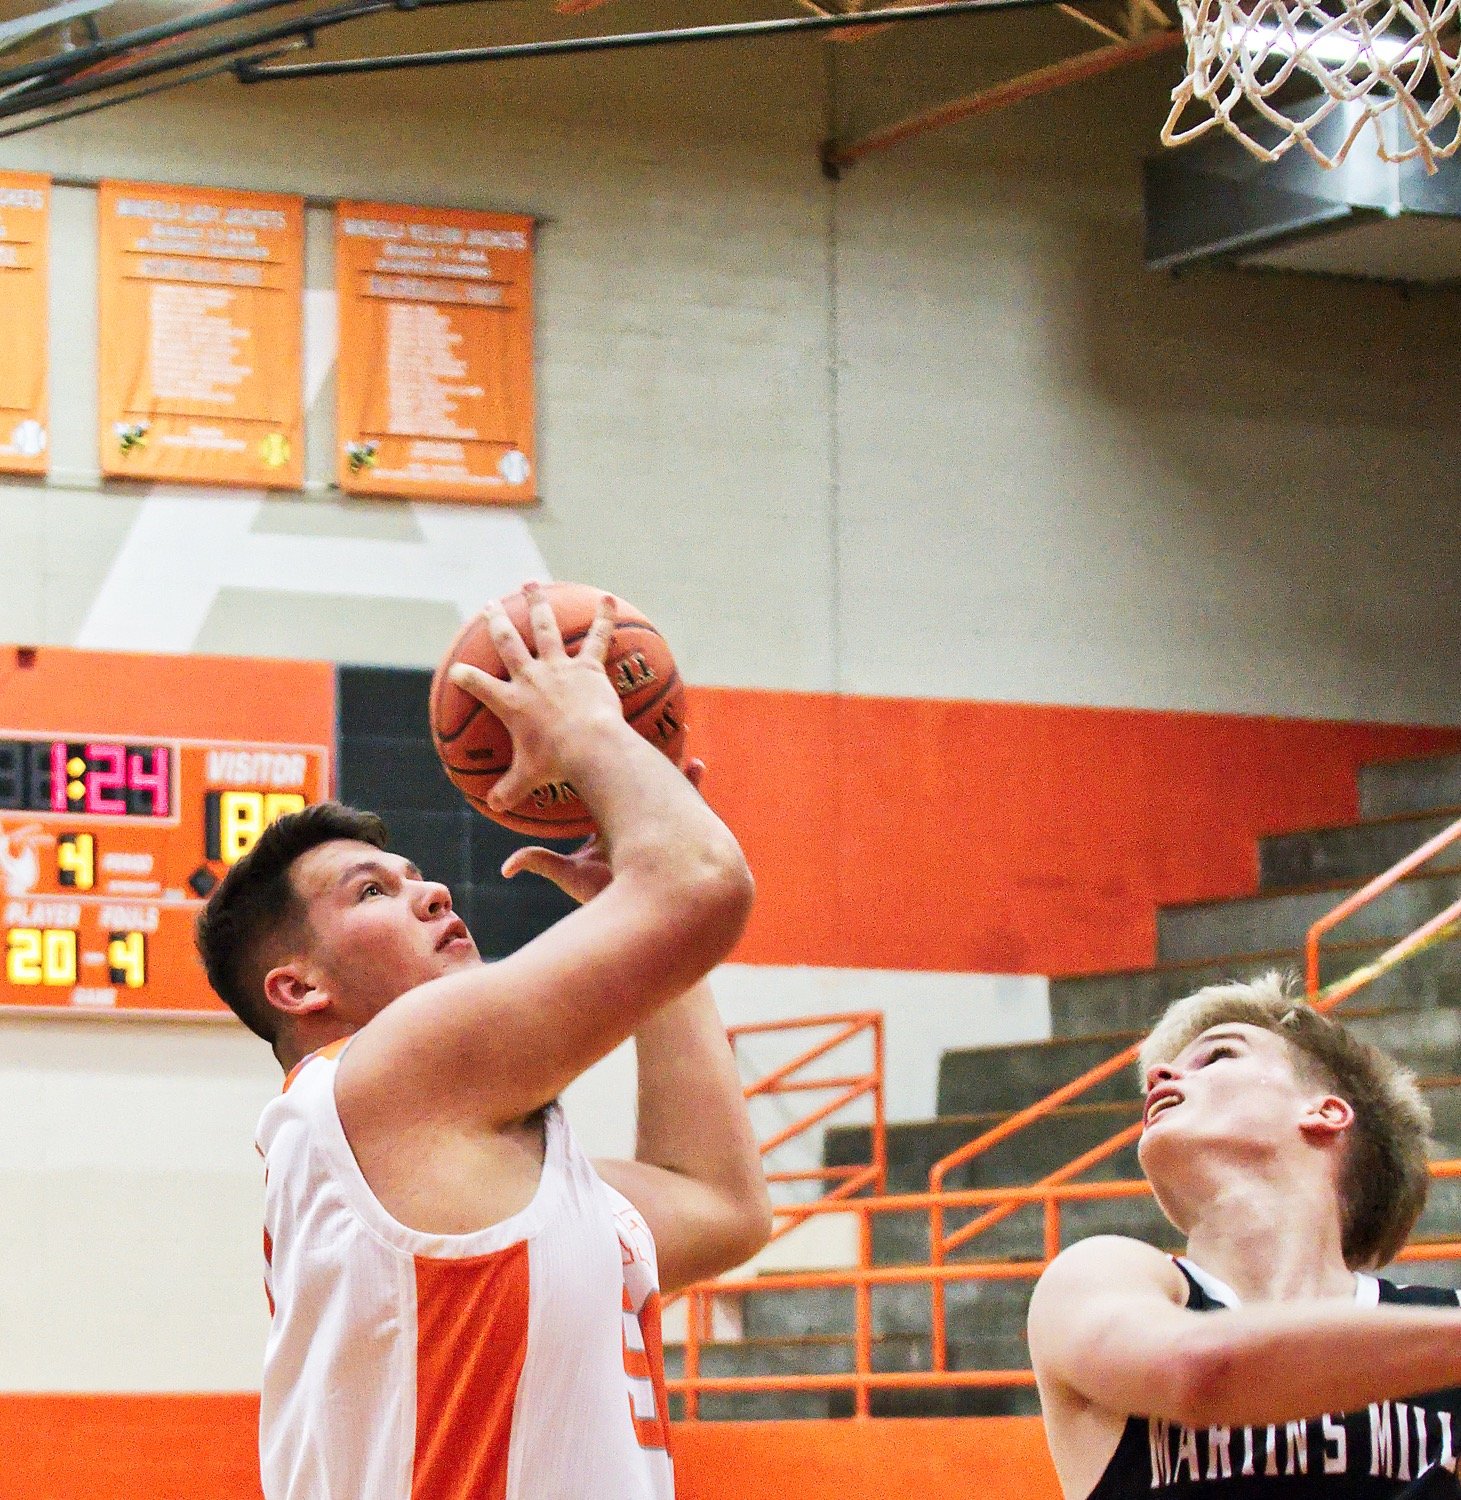 Jackson Anderson joined the basketball squad for his senior year, and his first bucket for the season, coming off a rebound, drew enthusiastic cheers from he Mineola faithful. [more shots here]